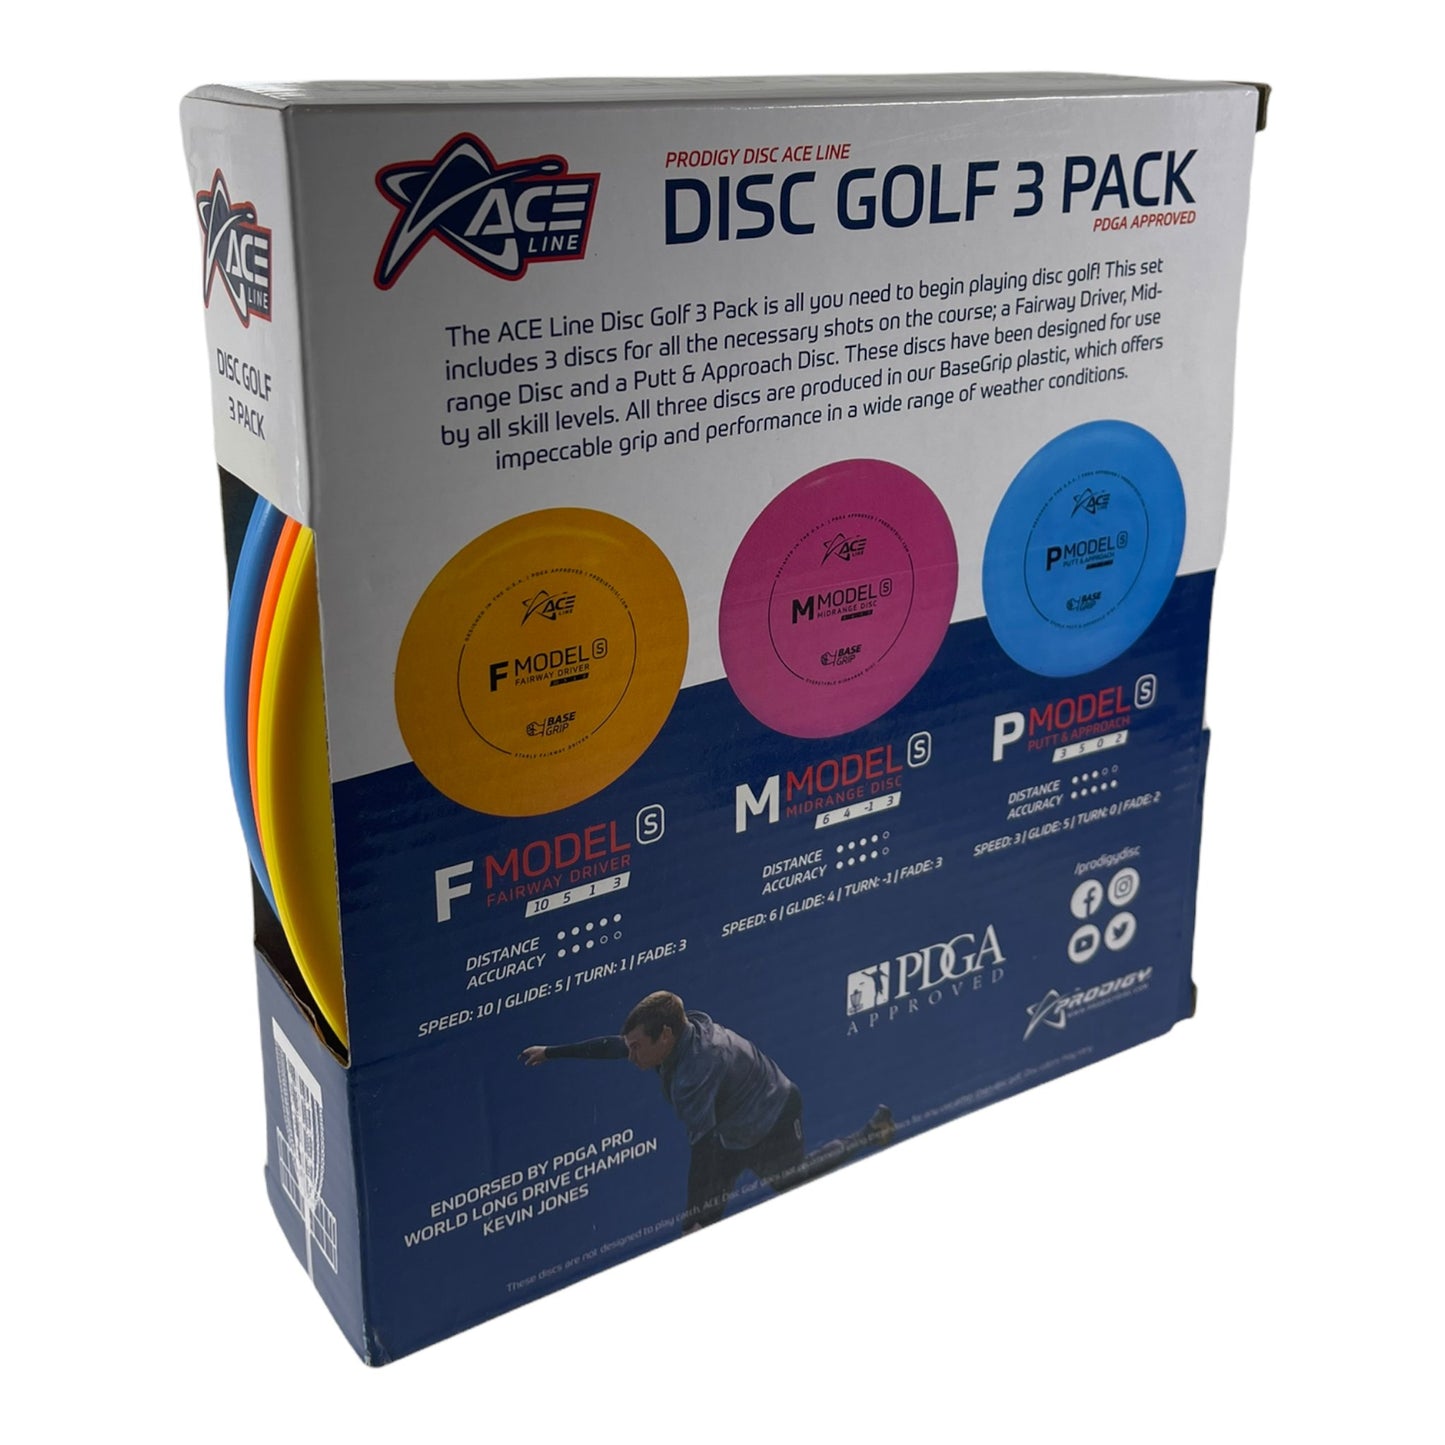 Prodigy Disc Prodigy Disc Golf 3 Pack | Ace Line (Lightweight)